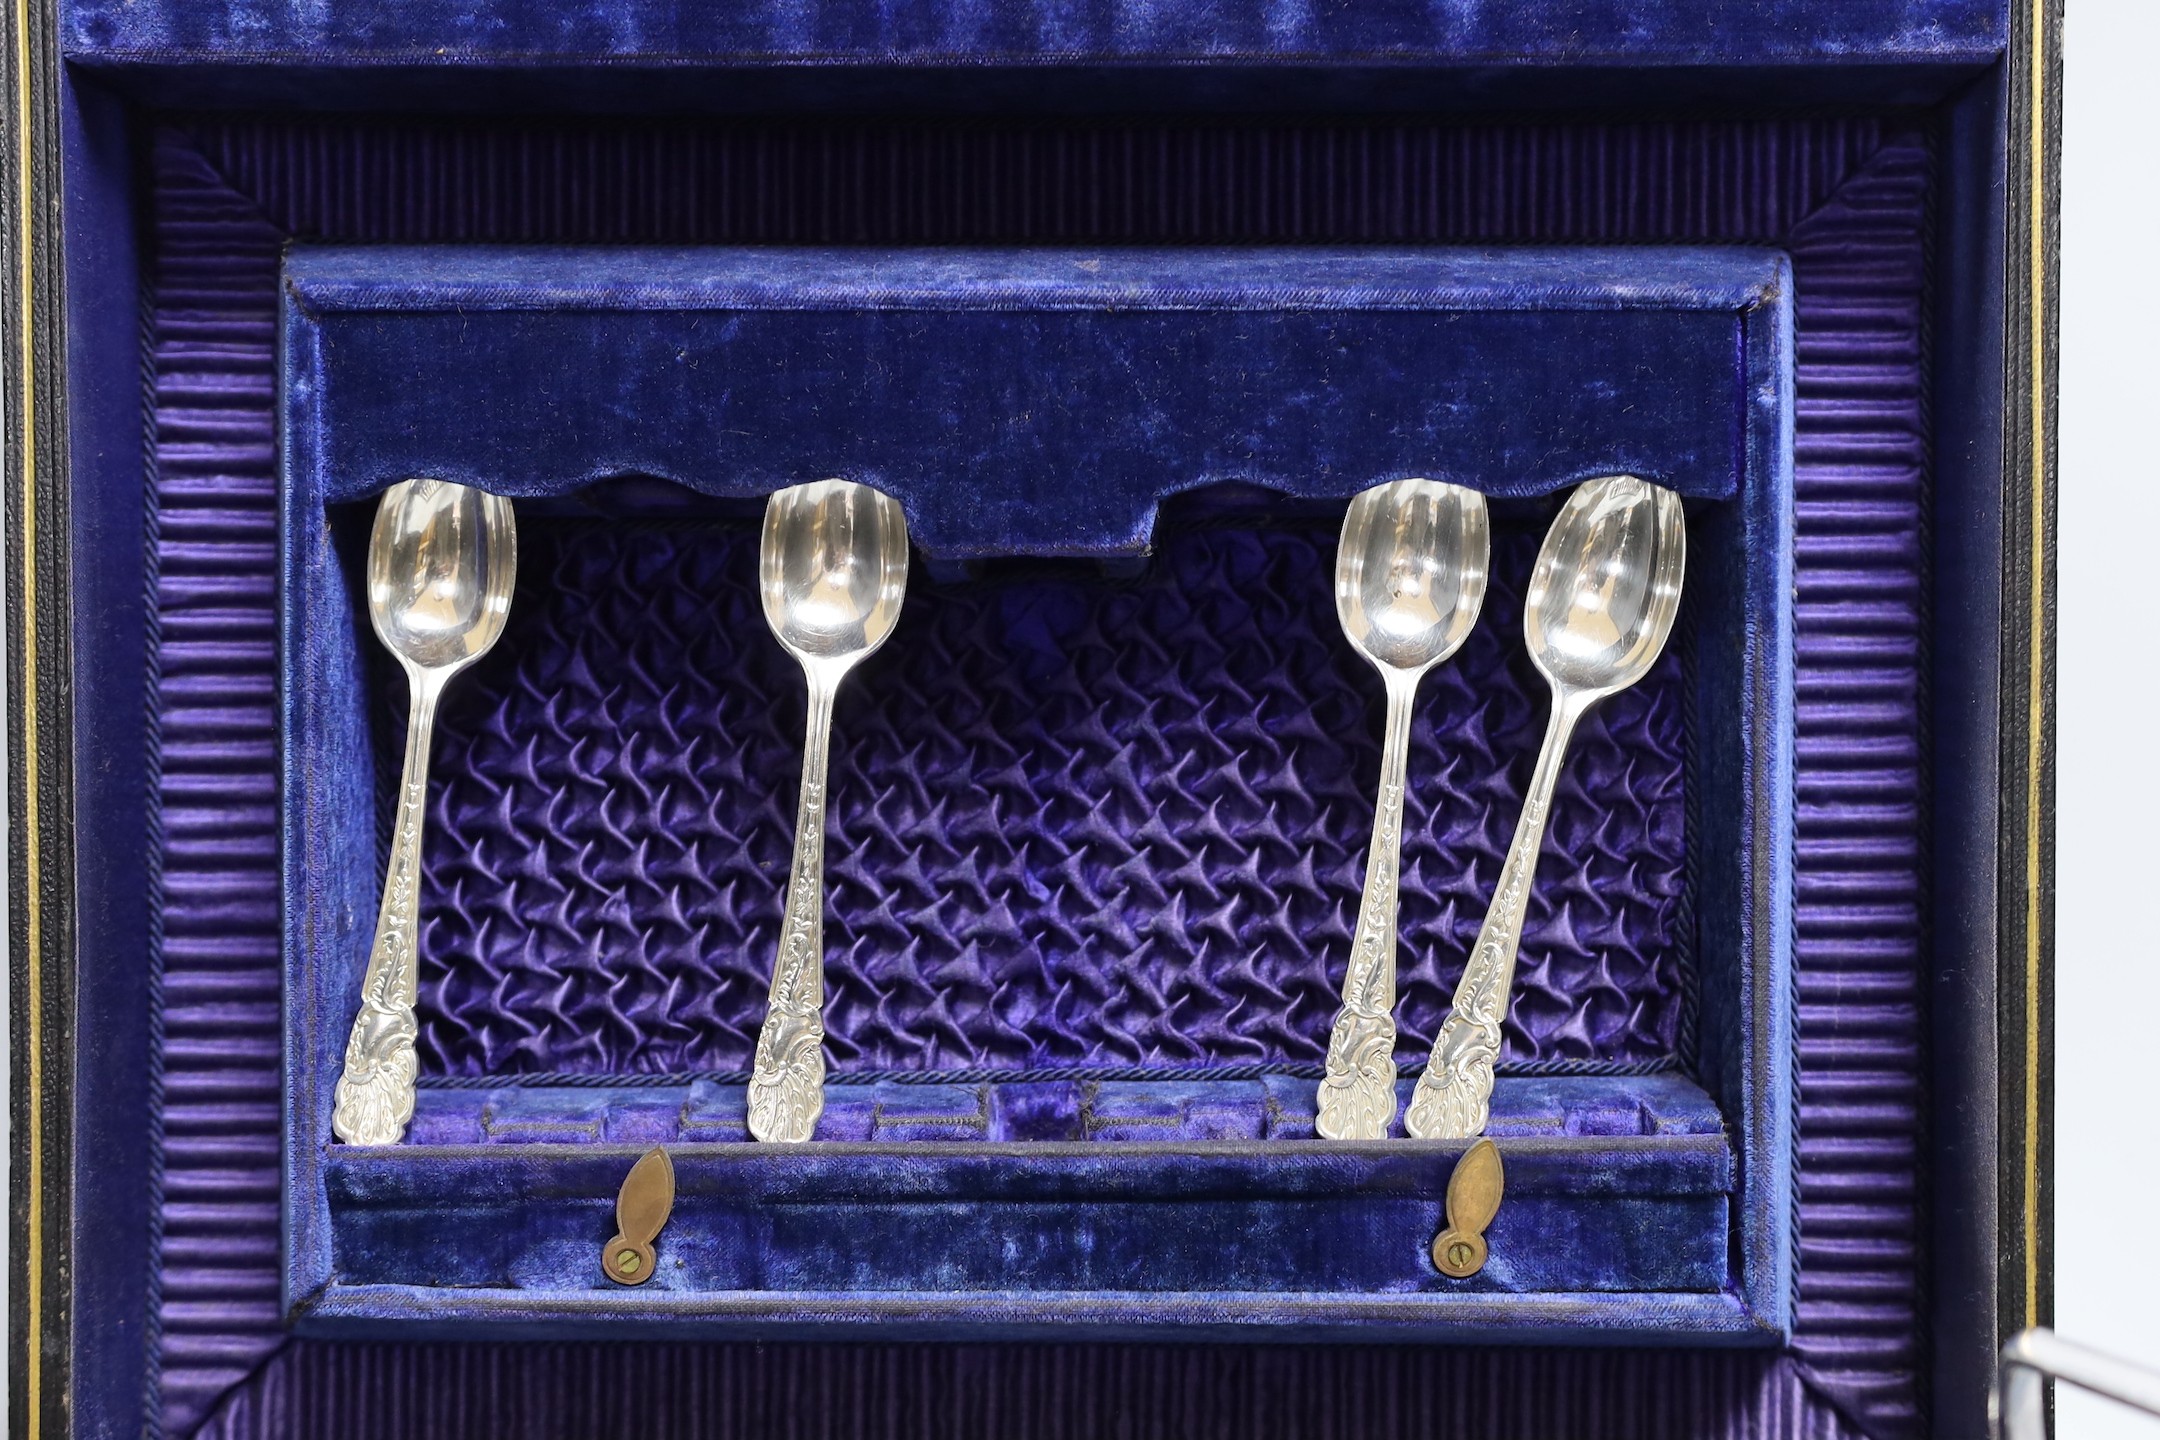 Six pairs of silver plated and engraved dessert knives and forks, with server, mother of pearl - Image 3 of 4